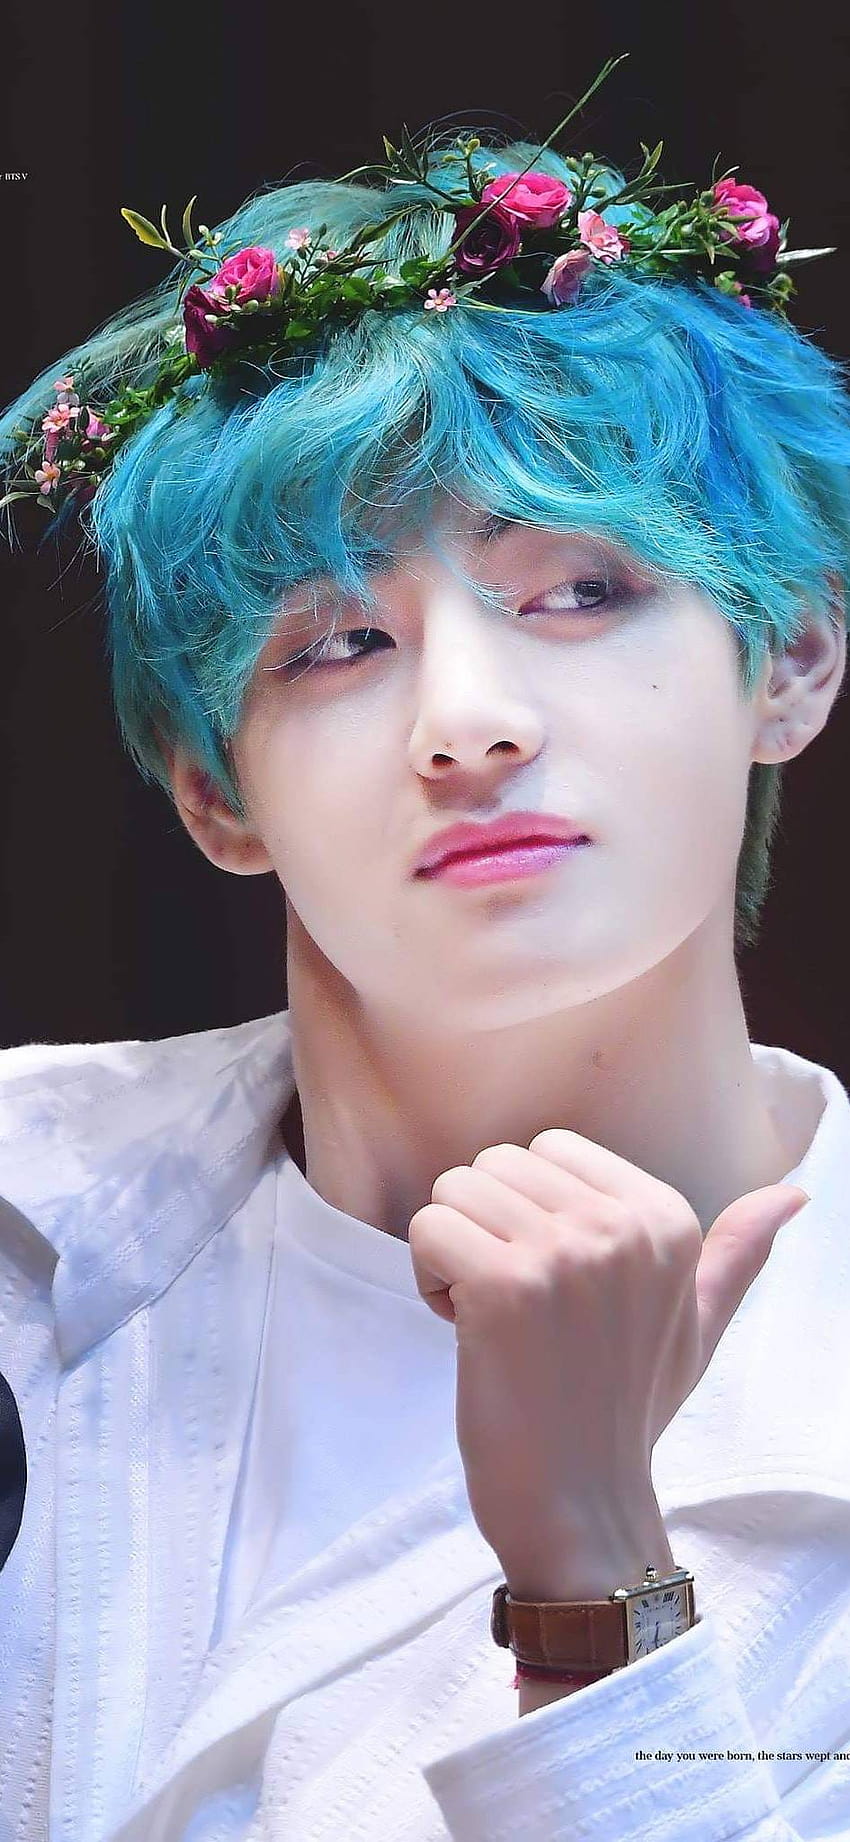 Bts V posted by Michelle Sellers, v bts cute HD phone wallpaper